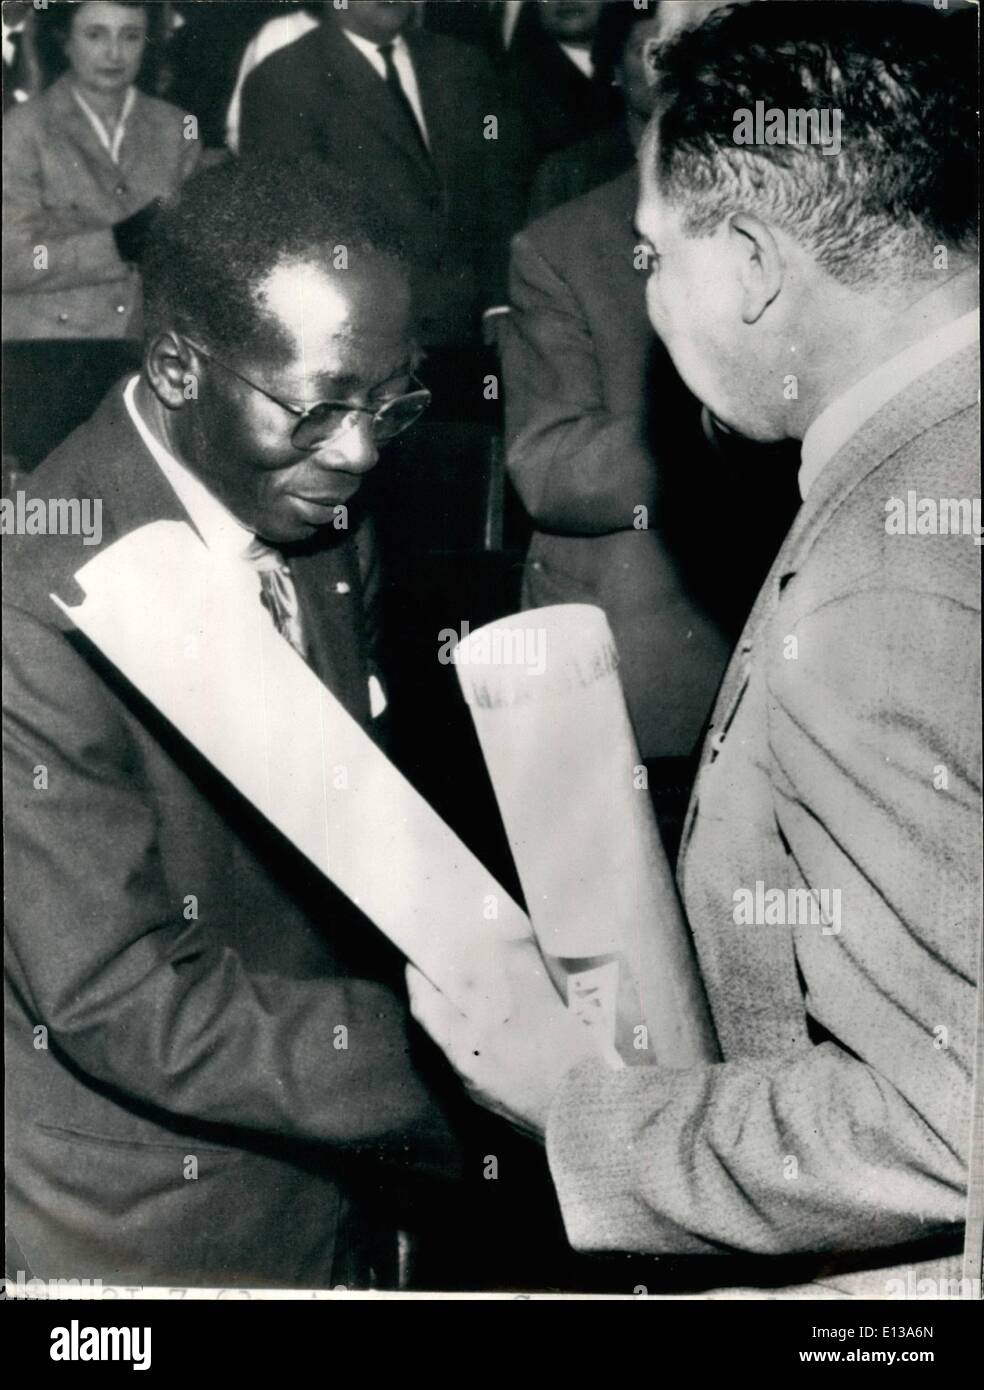 Feb. 29, 2012 - The President of the Republic of Senegal, Leopold Senghor won the International Grand Prize of Poetry, which was awarded to him for his poems published under the title ''Nocturnes'' Photo shows President Senghor receiving the diploma at the 5th National Congress of the Association of Poets and Artists of France held at Rouen. Stock Photo